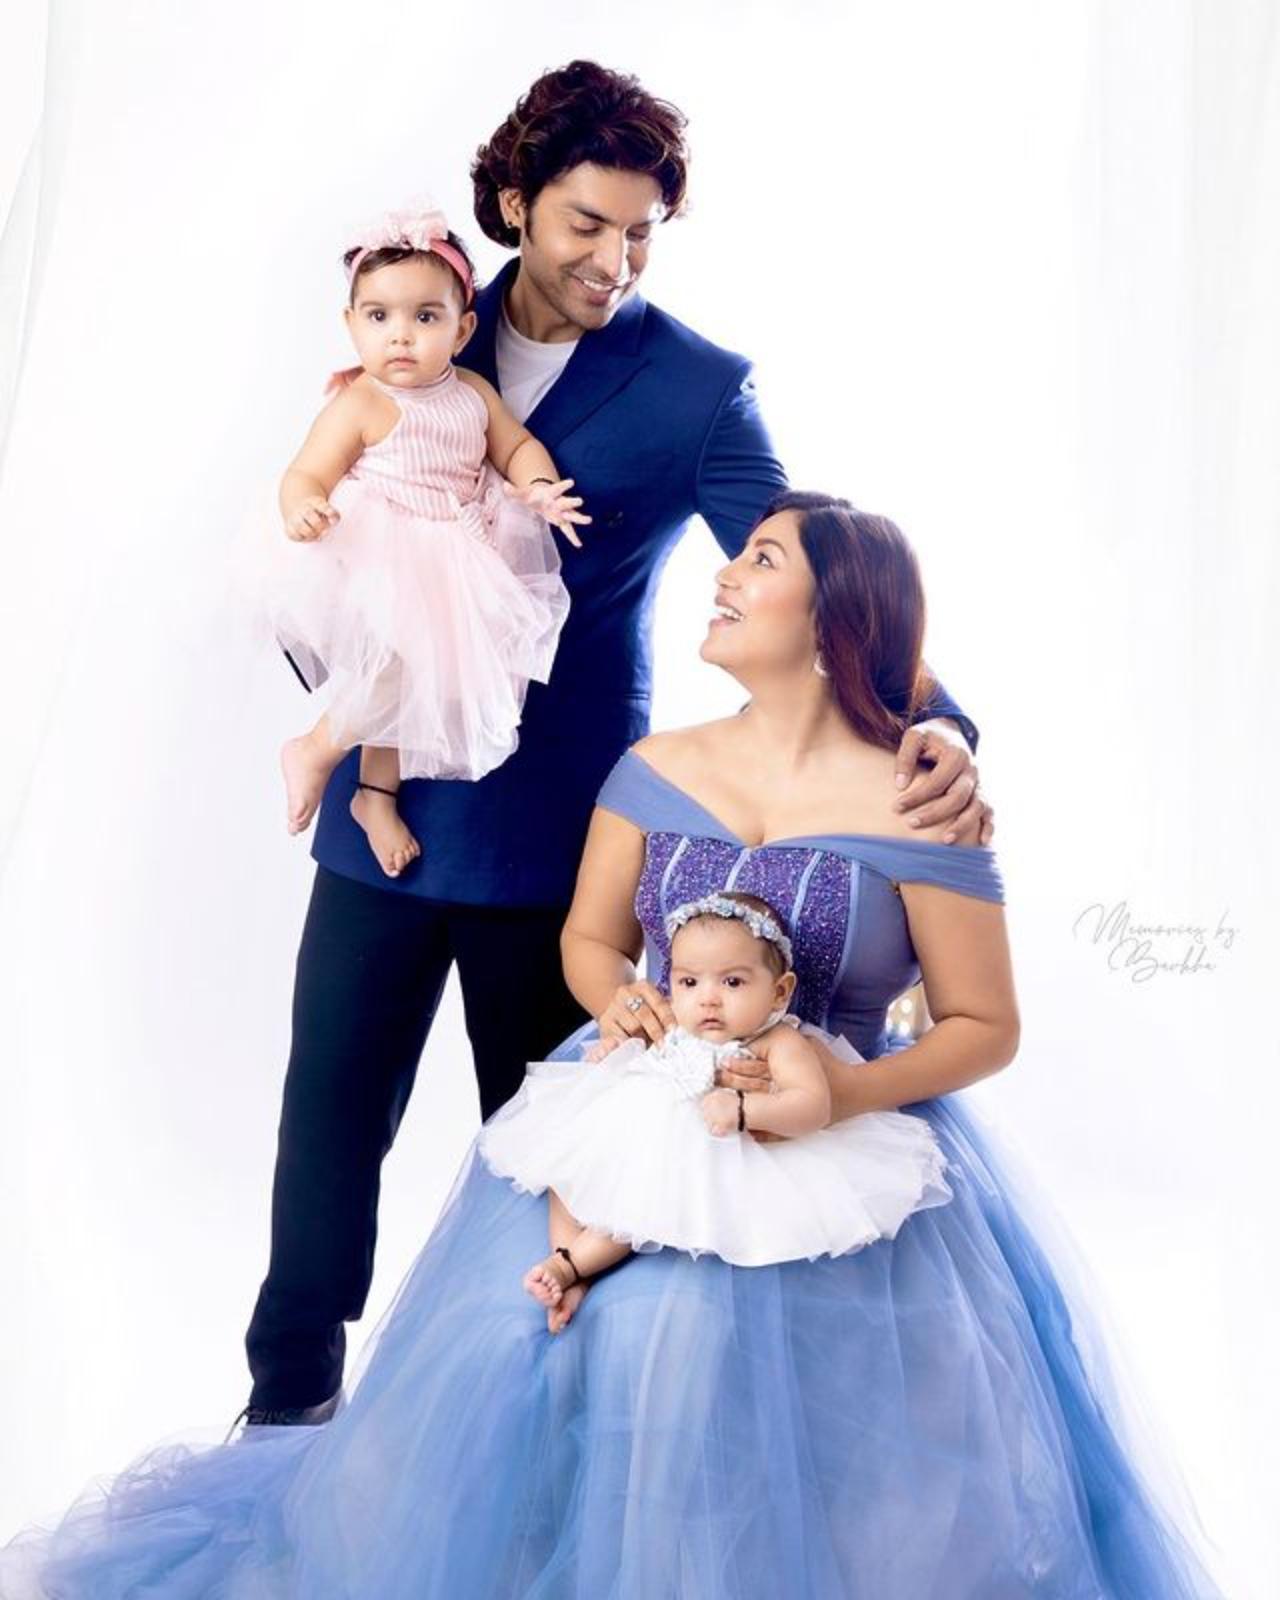  Four months after giving birth to their first child, the couple announced their second pregnancy. On November 14 they again became parents to a baby girl Divisha